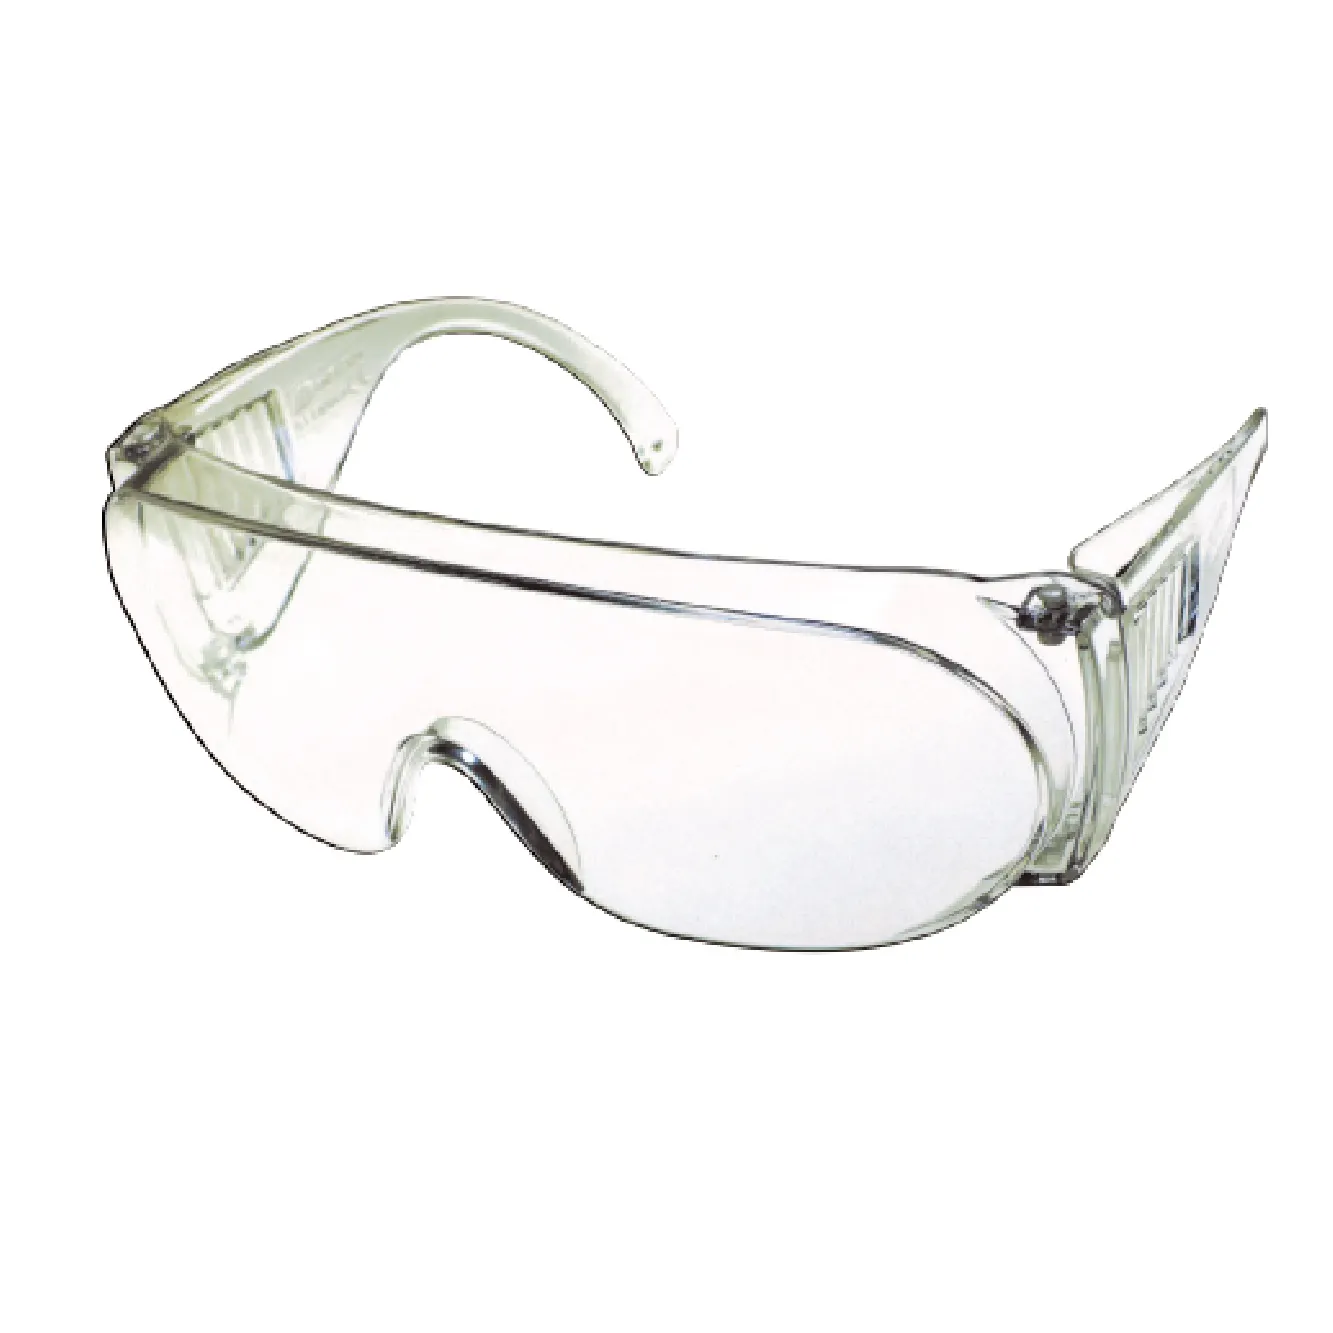 High quality SA0112 Z87.1 CE EN166 manufacturing z87 safety glasses taiwan